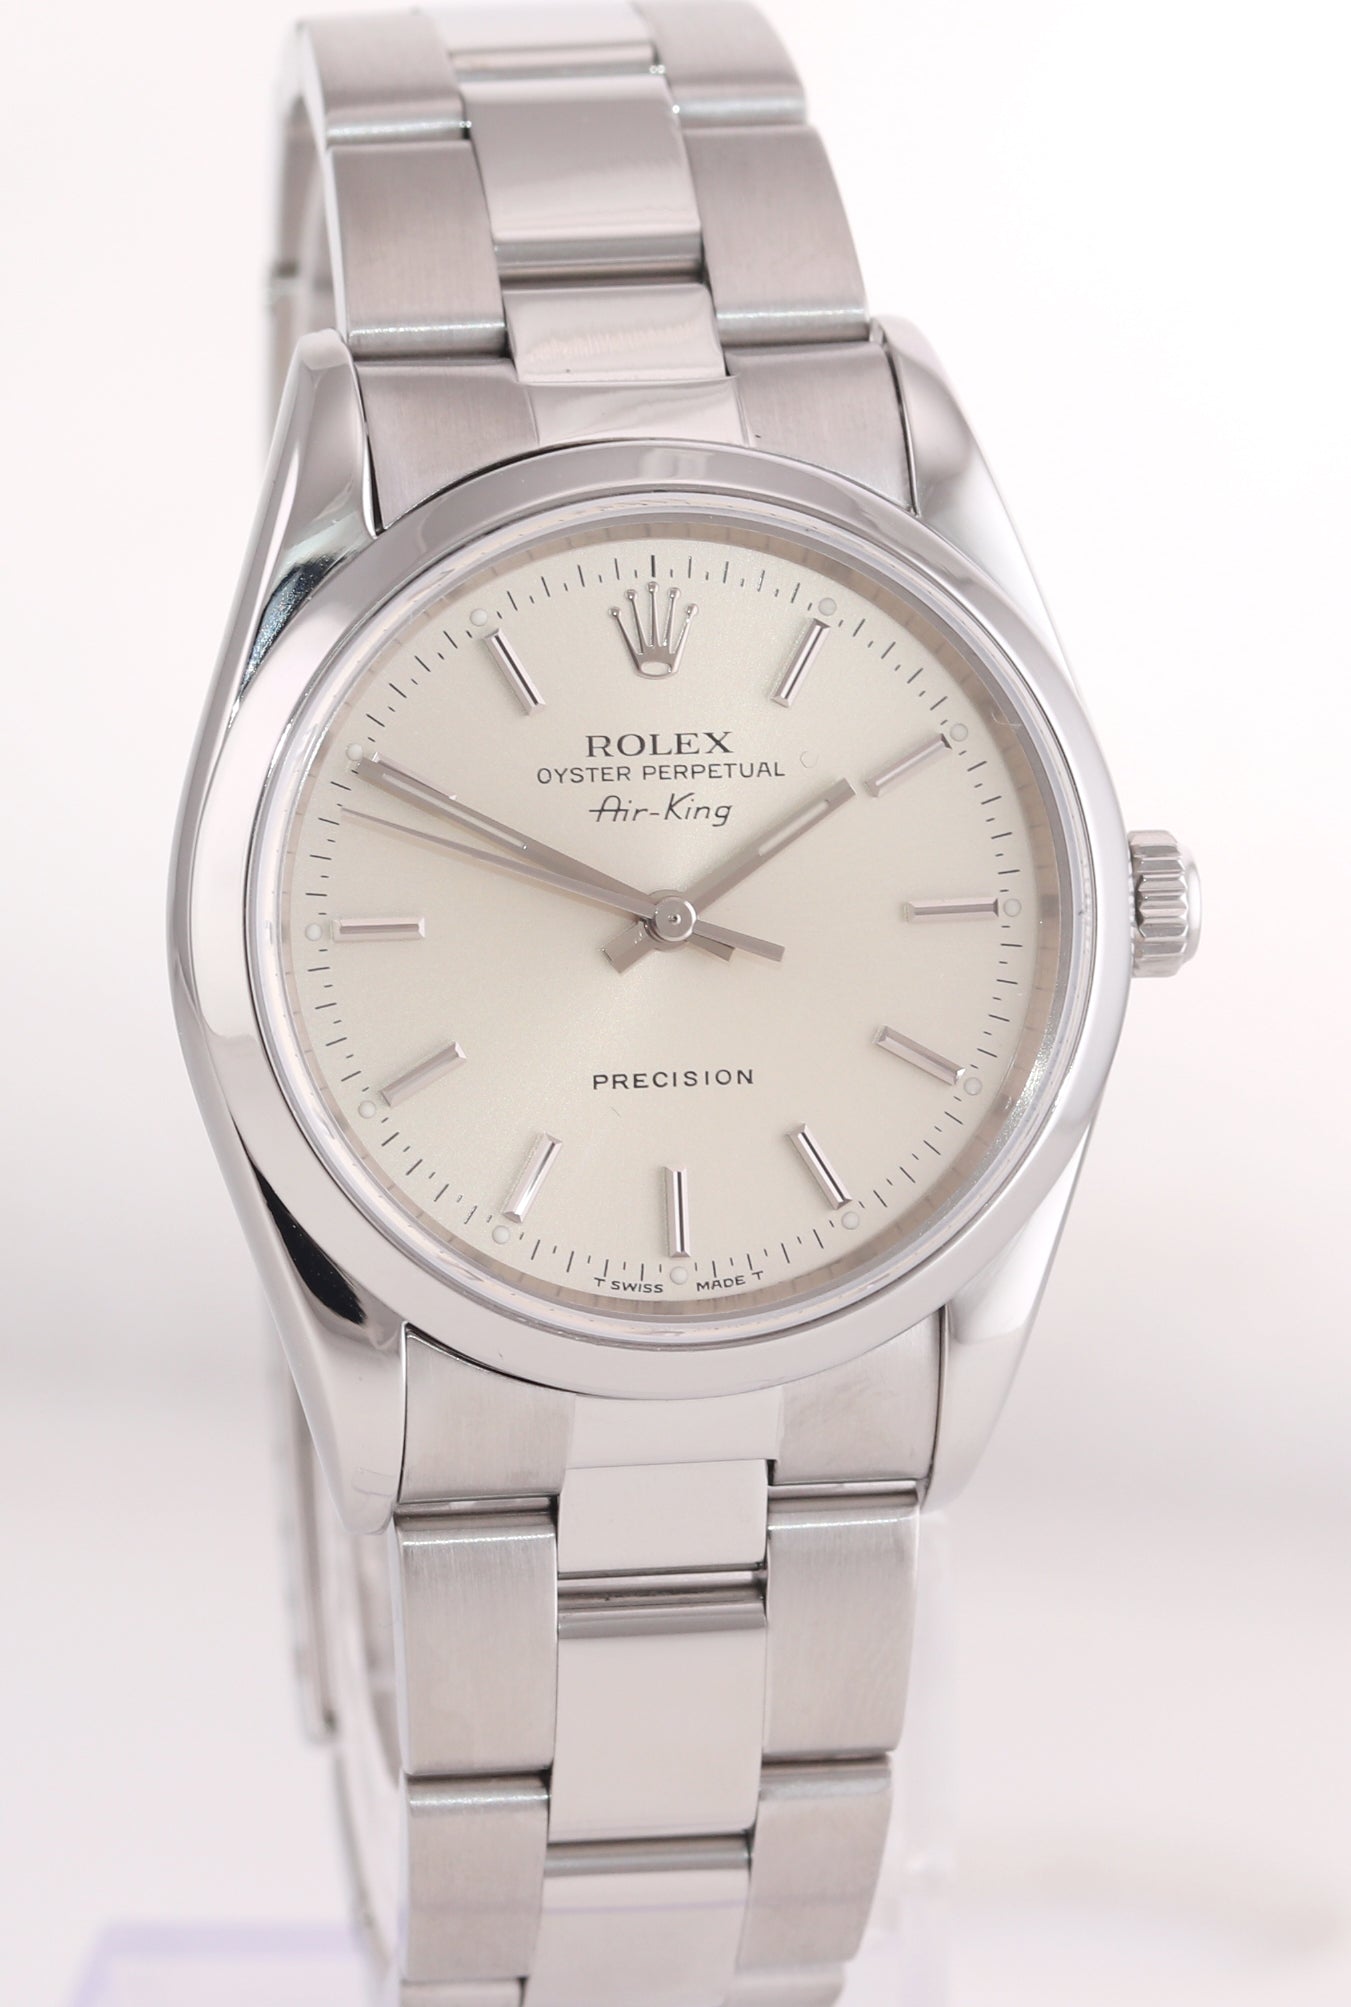 PAPERS Rolex Oyster Perpetual Air-King Silver 14000M 34mm Precision Watch Box